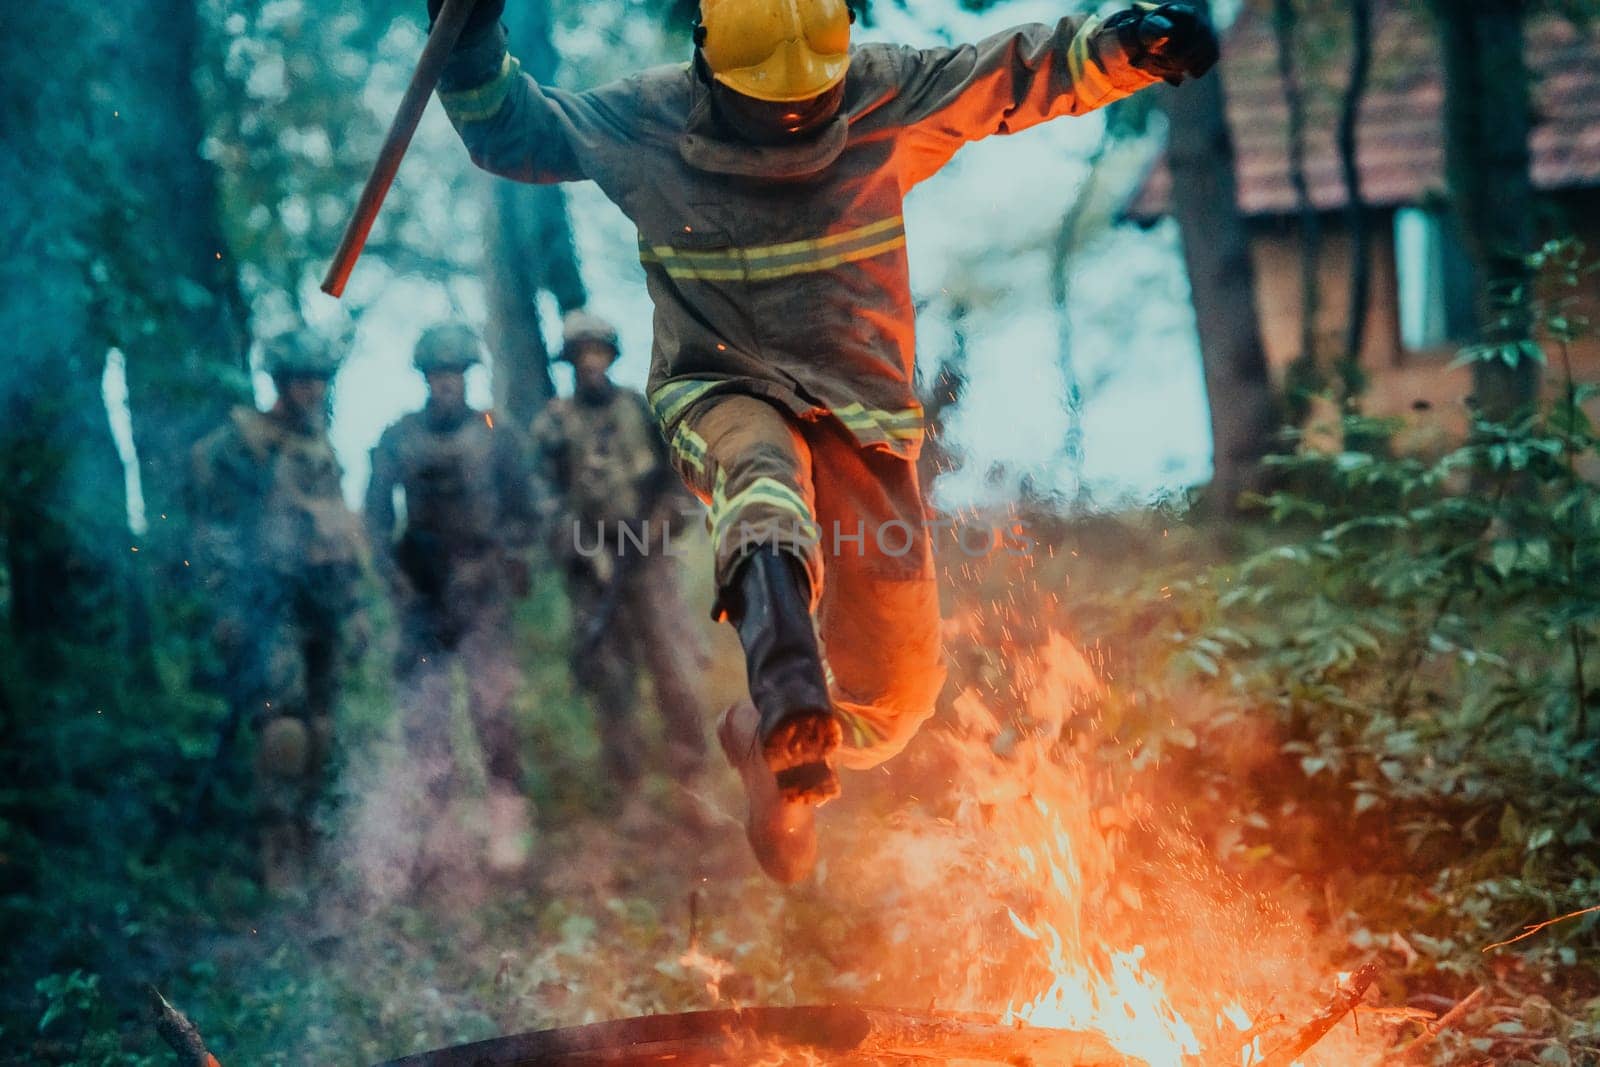 firefighter hero in action danger jumping over fire flame to rescue and save.